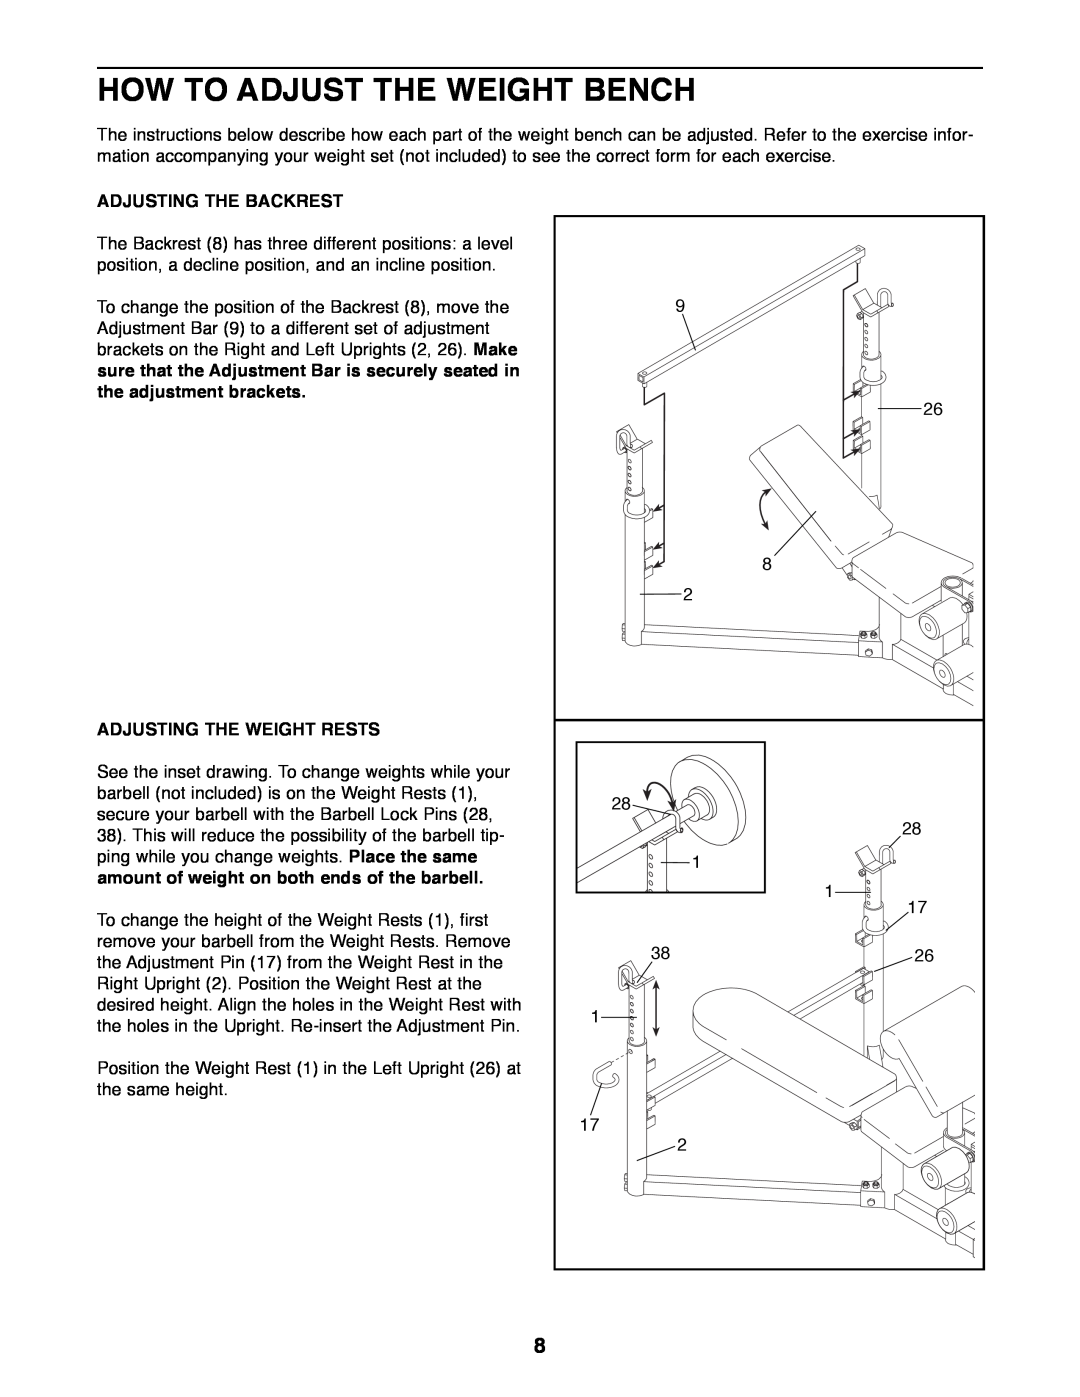 ProForm PFBE30790 user manual How To Adjust The Weight Bench, Adjusting The Backrest, Adjusting The Weight Rests 